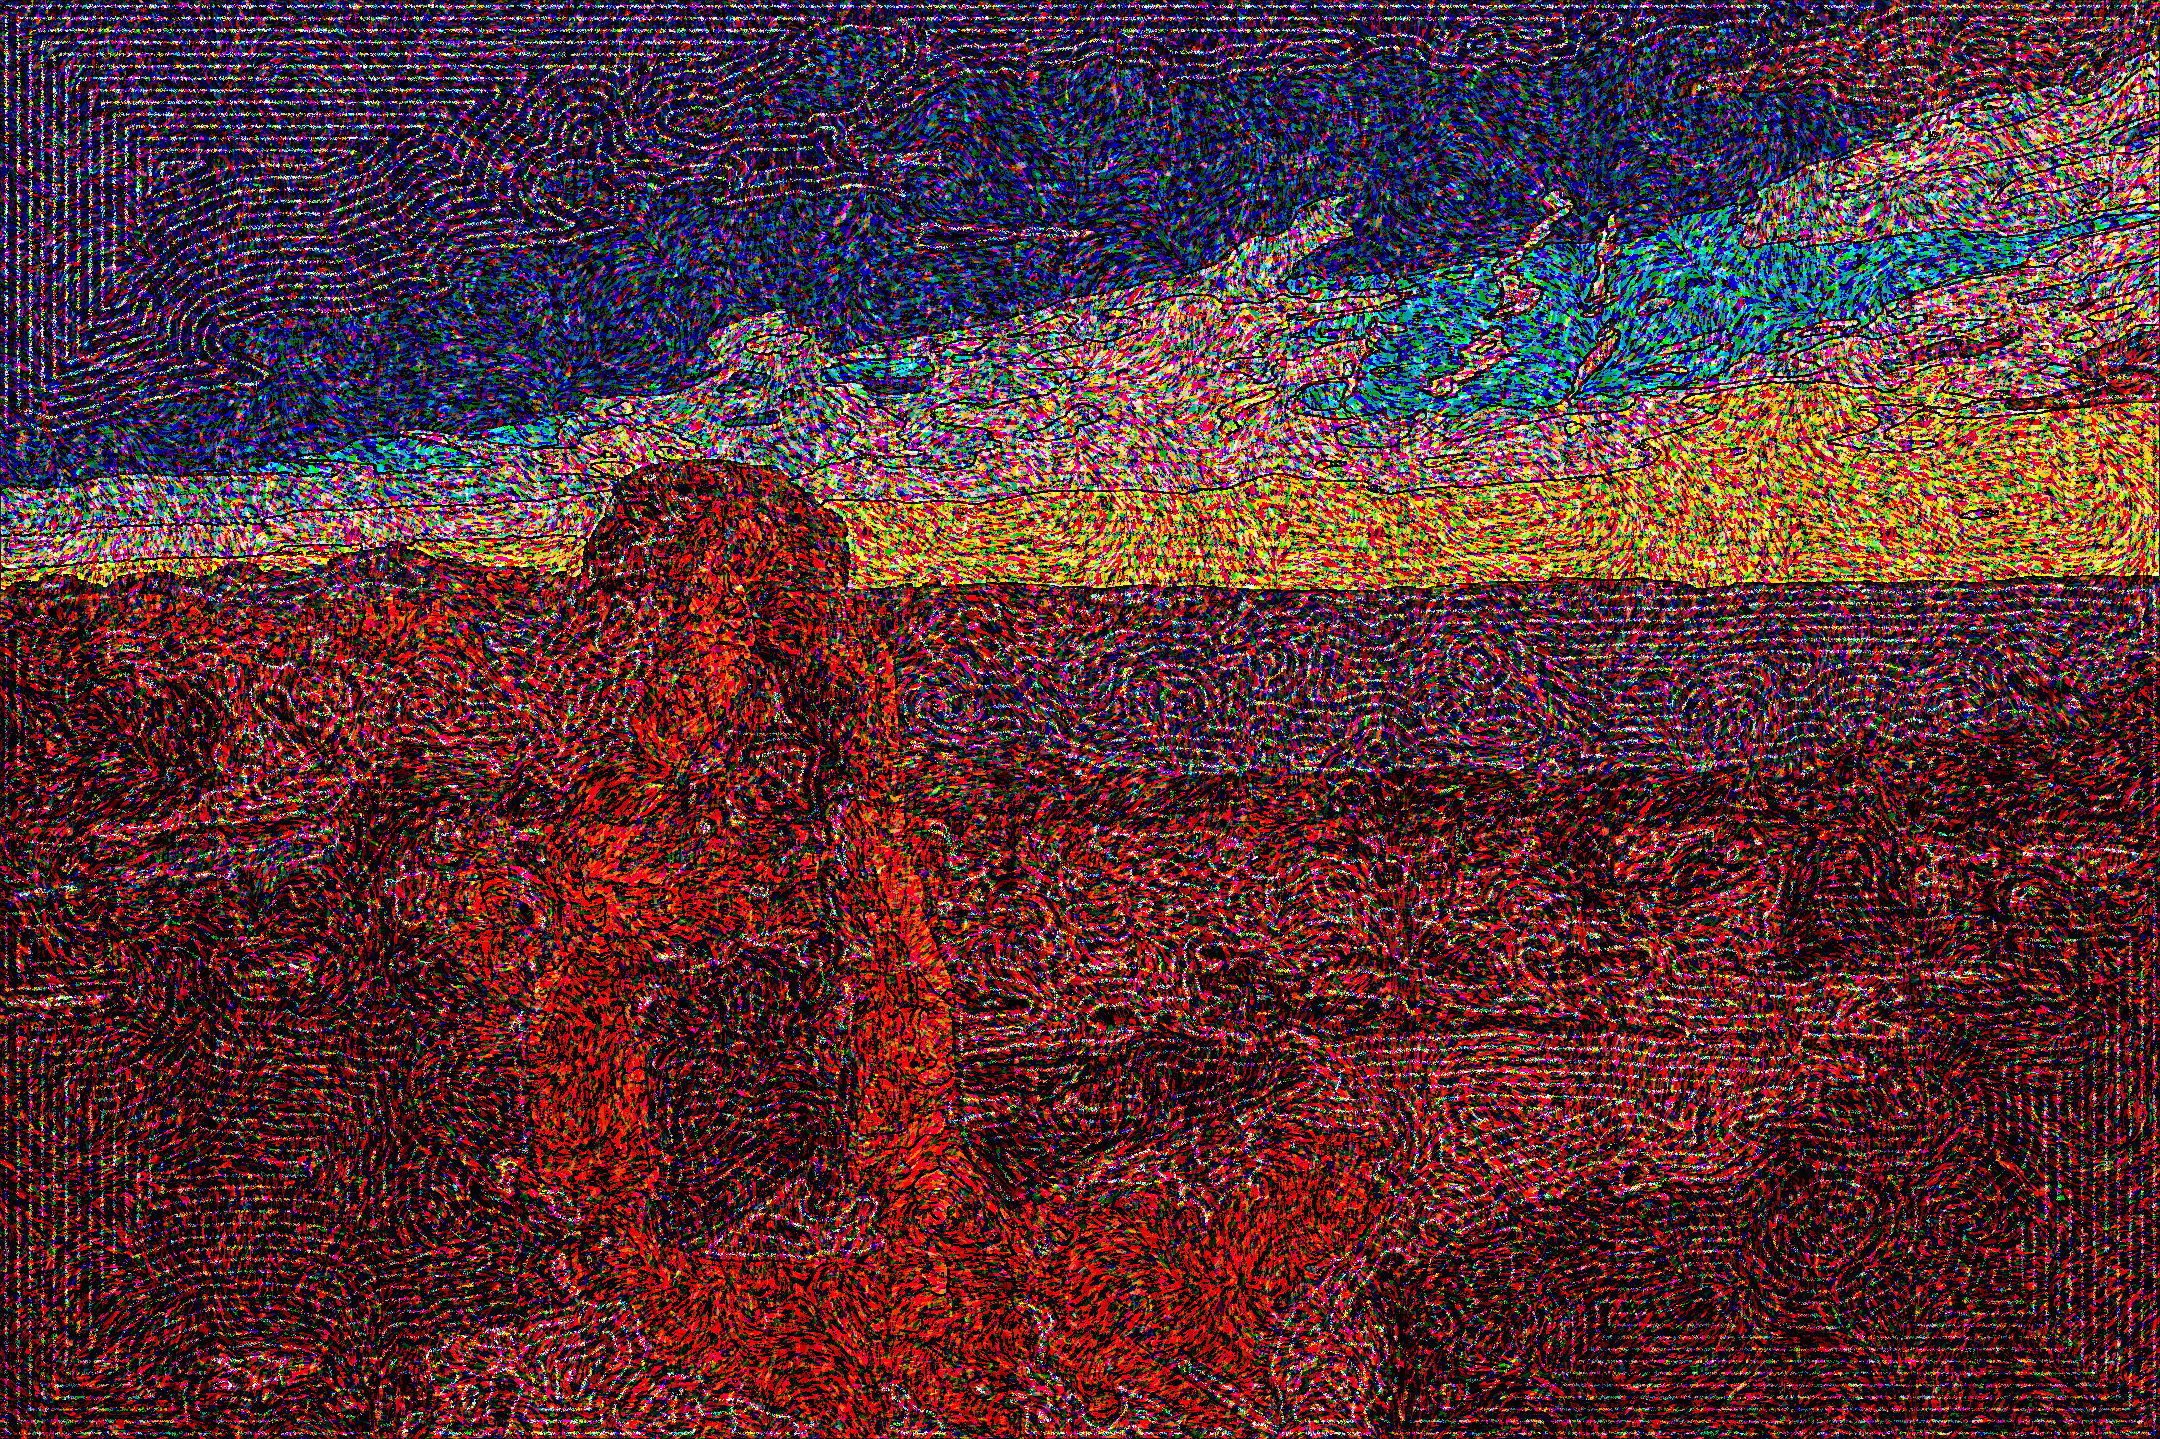 stone-arch-828730_1920, as a drawing style M, colours=12 (G'mic turbo halftone),BG=active pattern.jpeg